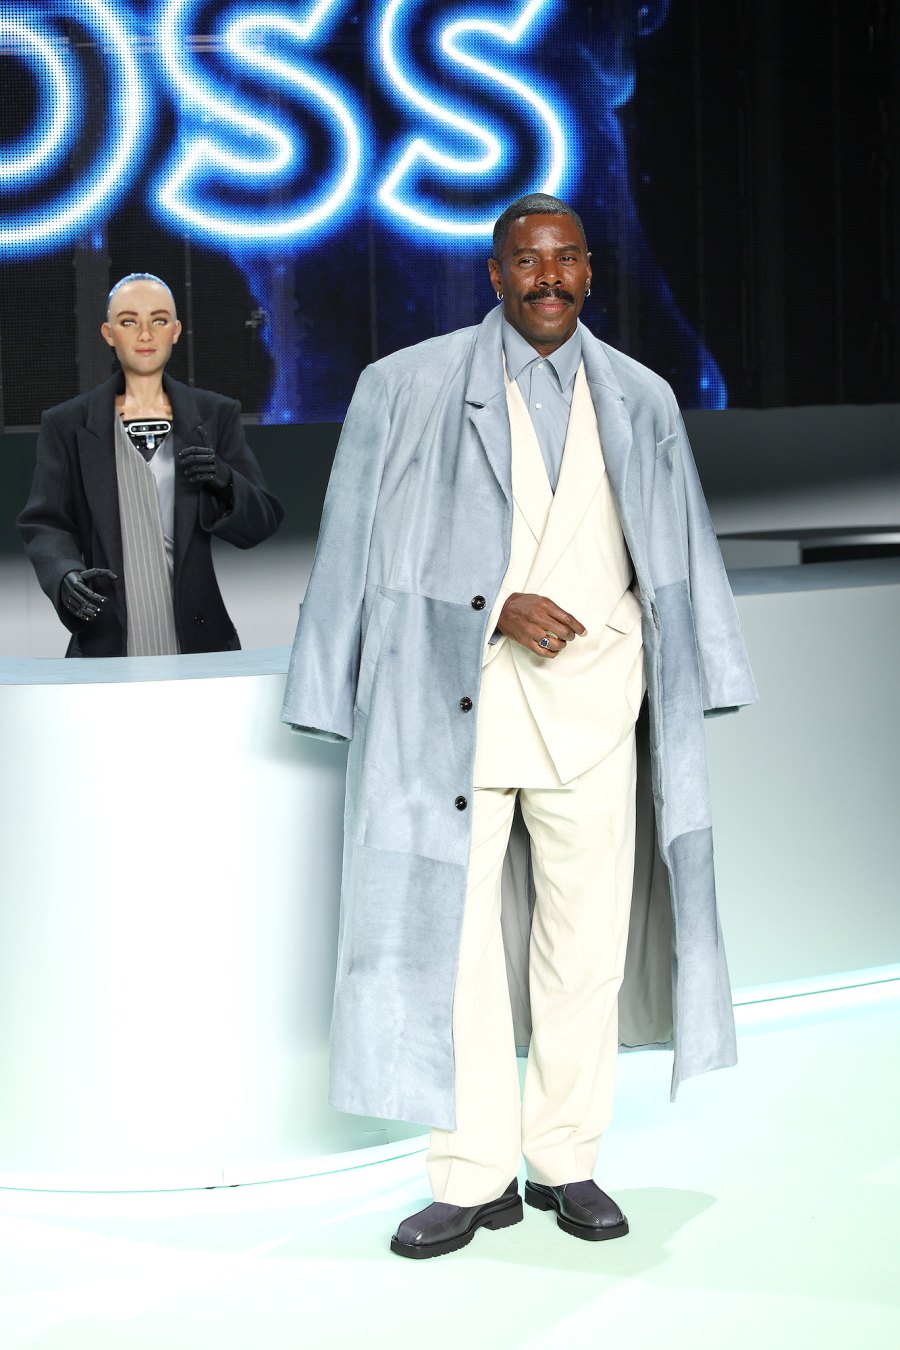 Colman Domingo s Style Evolution From Monochromatic Suits to Colorful Capes